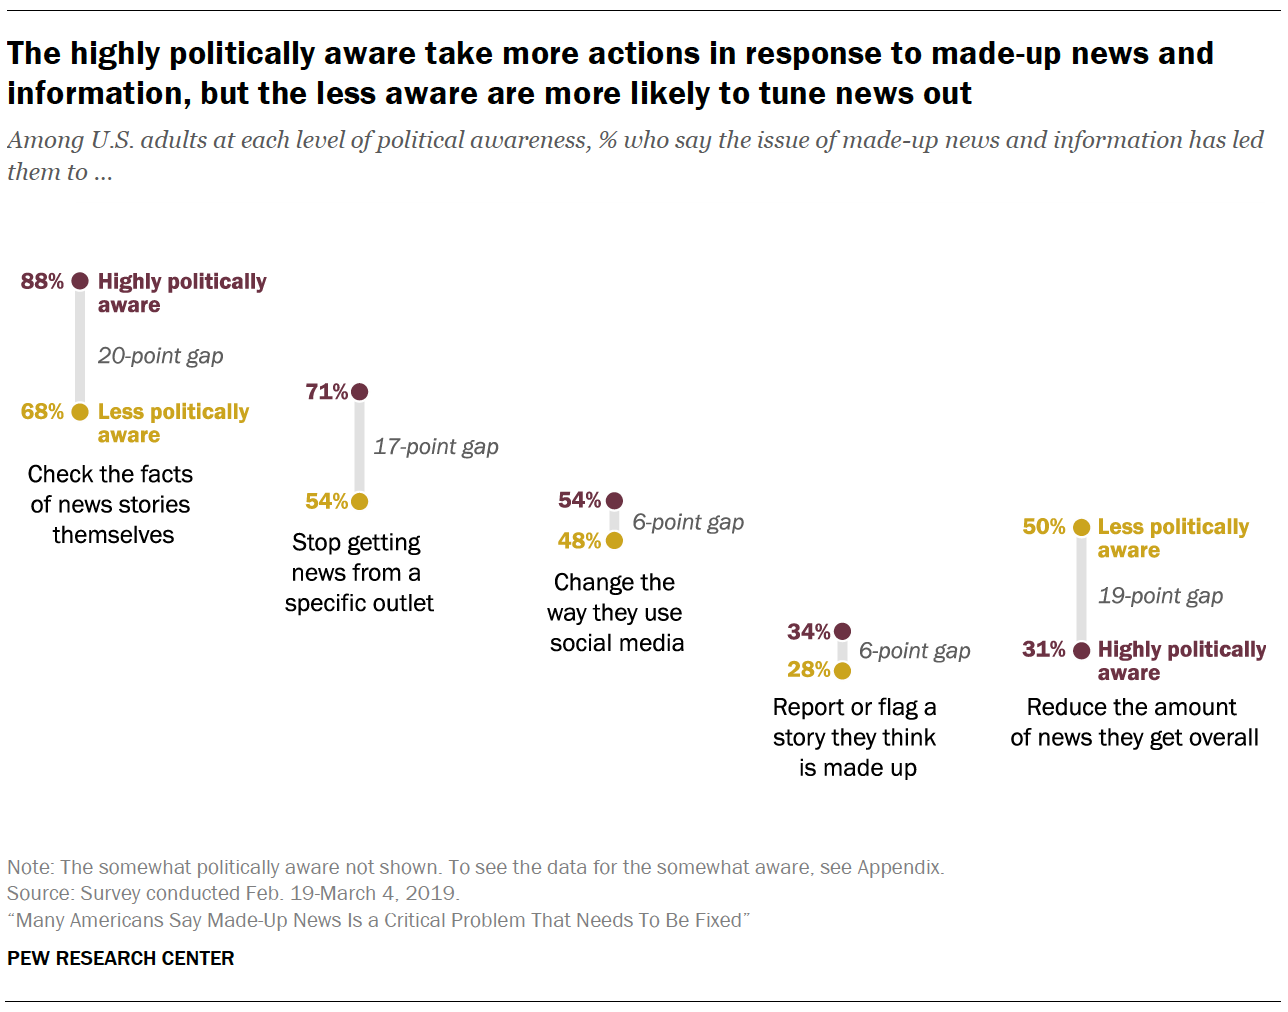 A chart showing The highly politically aware take more actions in response to made-up news and information, but the less aware are more likely to tune news out